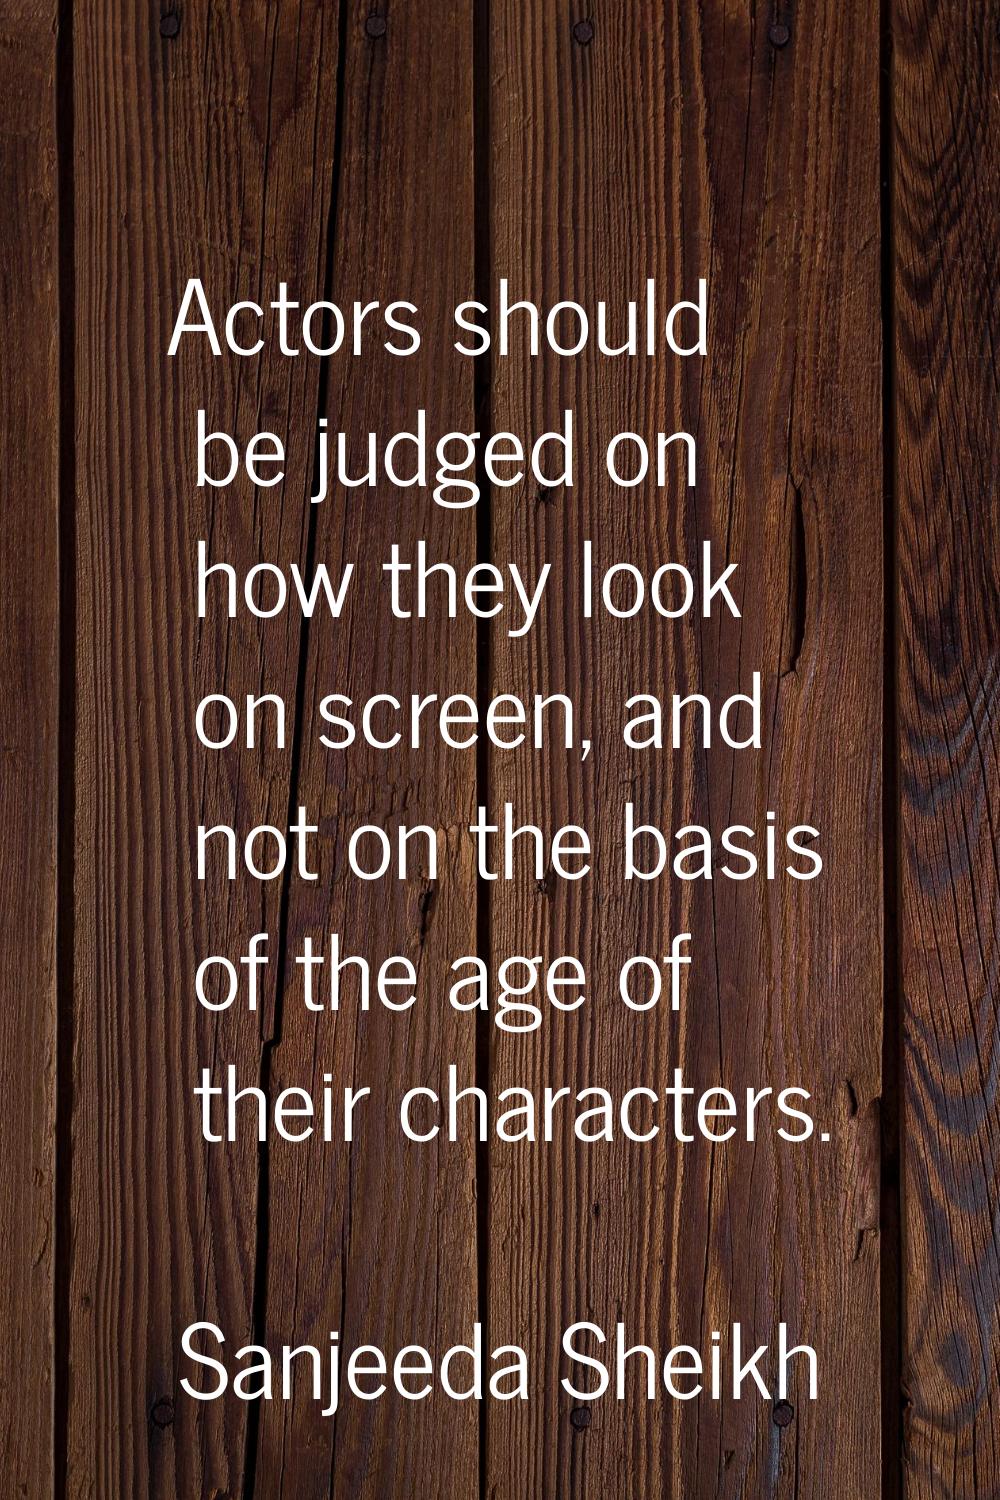 Actors should be judged on how they look on screen, and not on the basis of the age of their charac